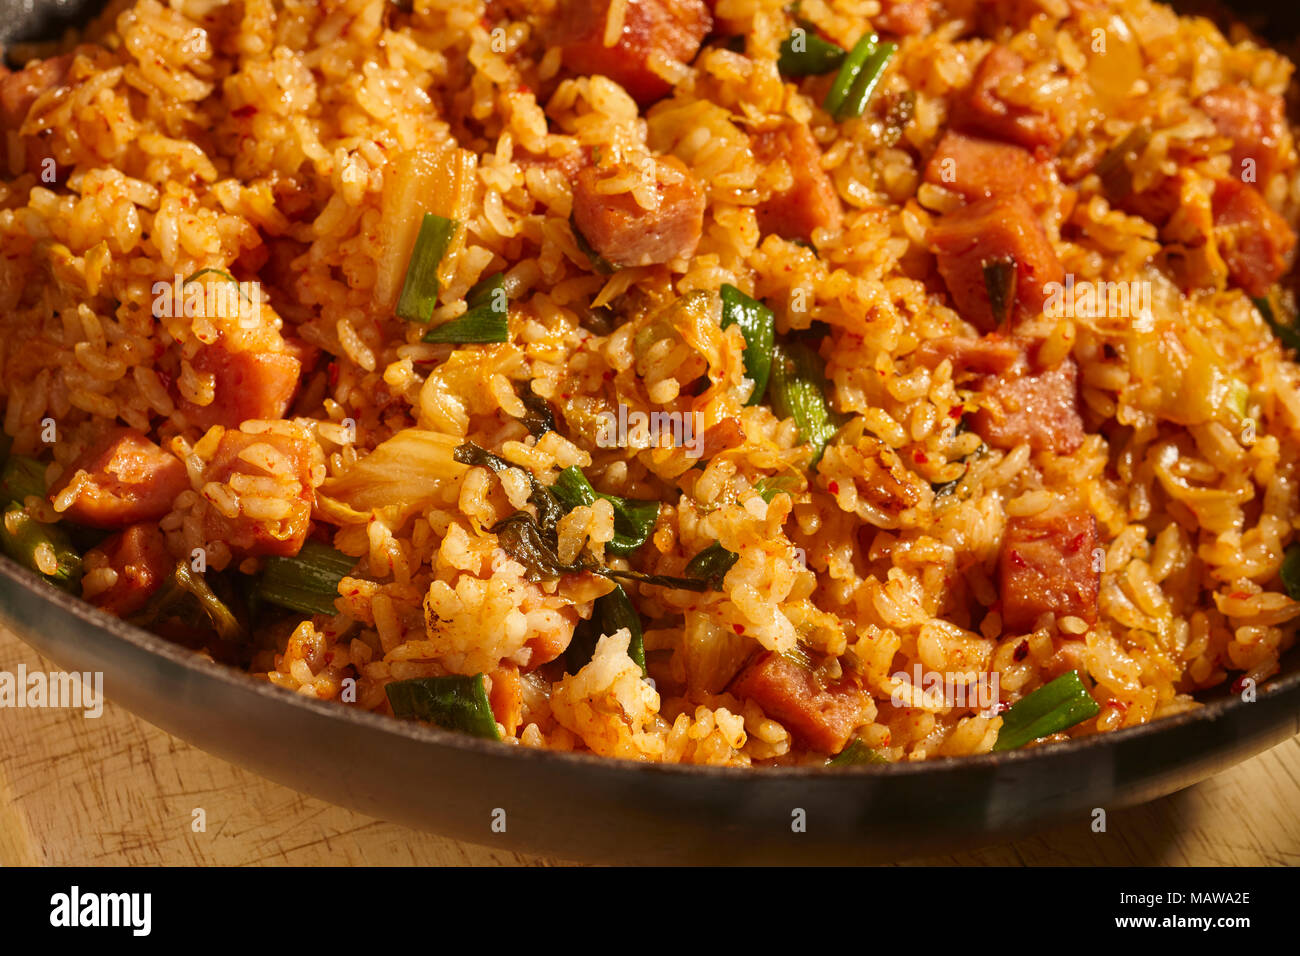 Spam and Kimchi fried rice in a black steel wok, a classic dish in Korean home cooking Stock Photo